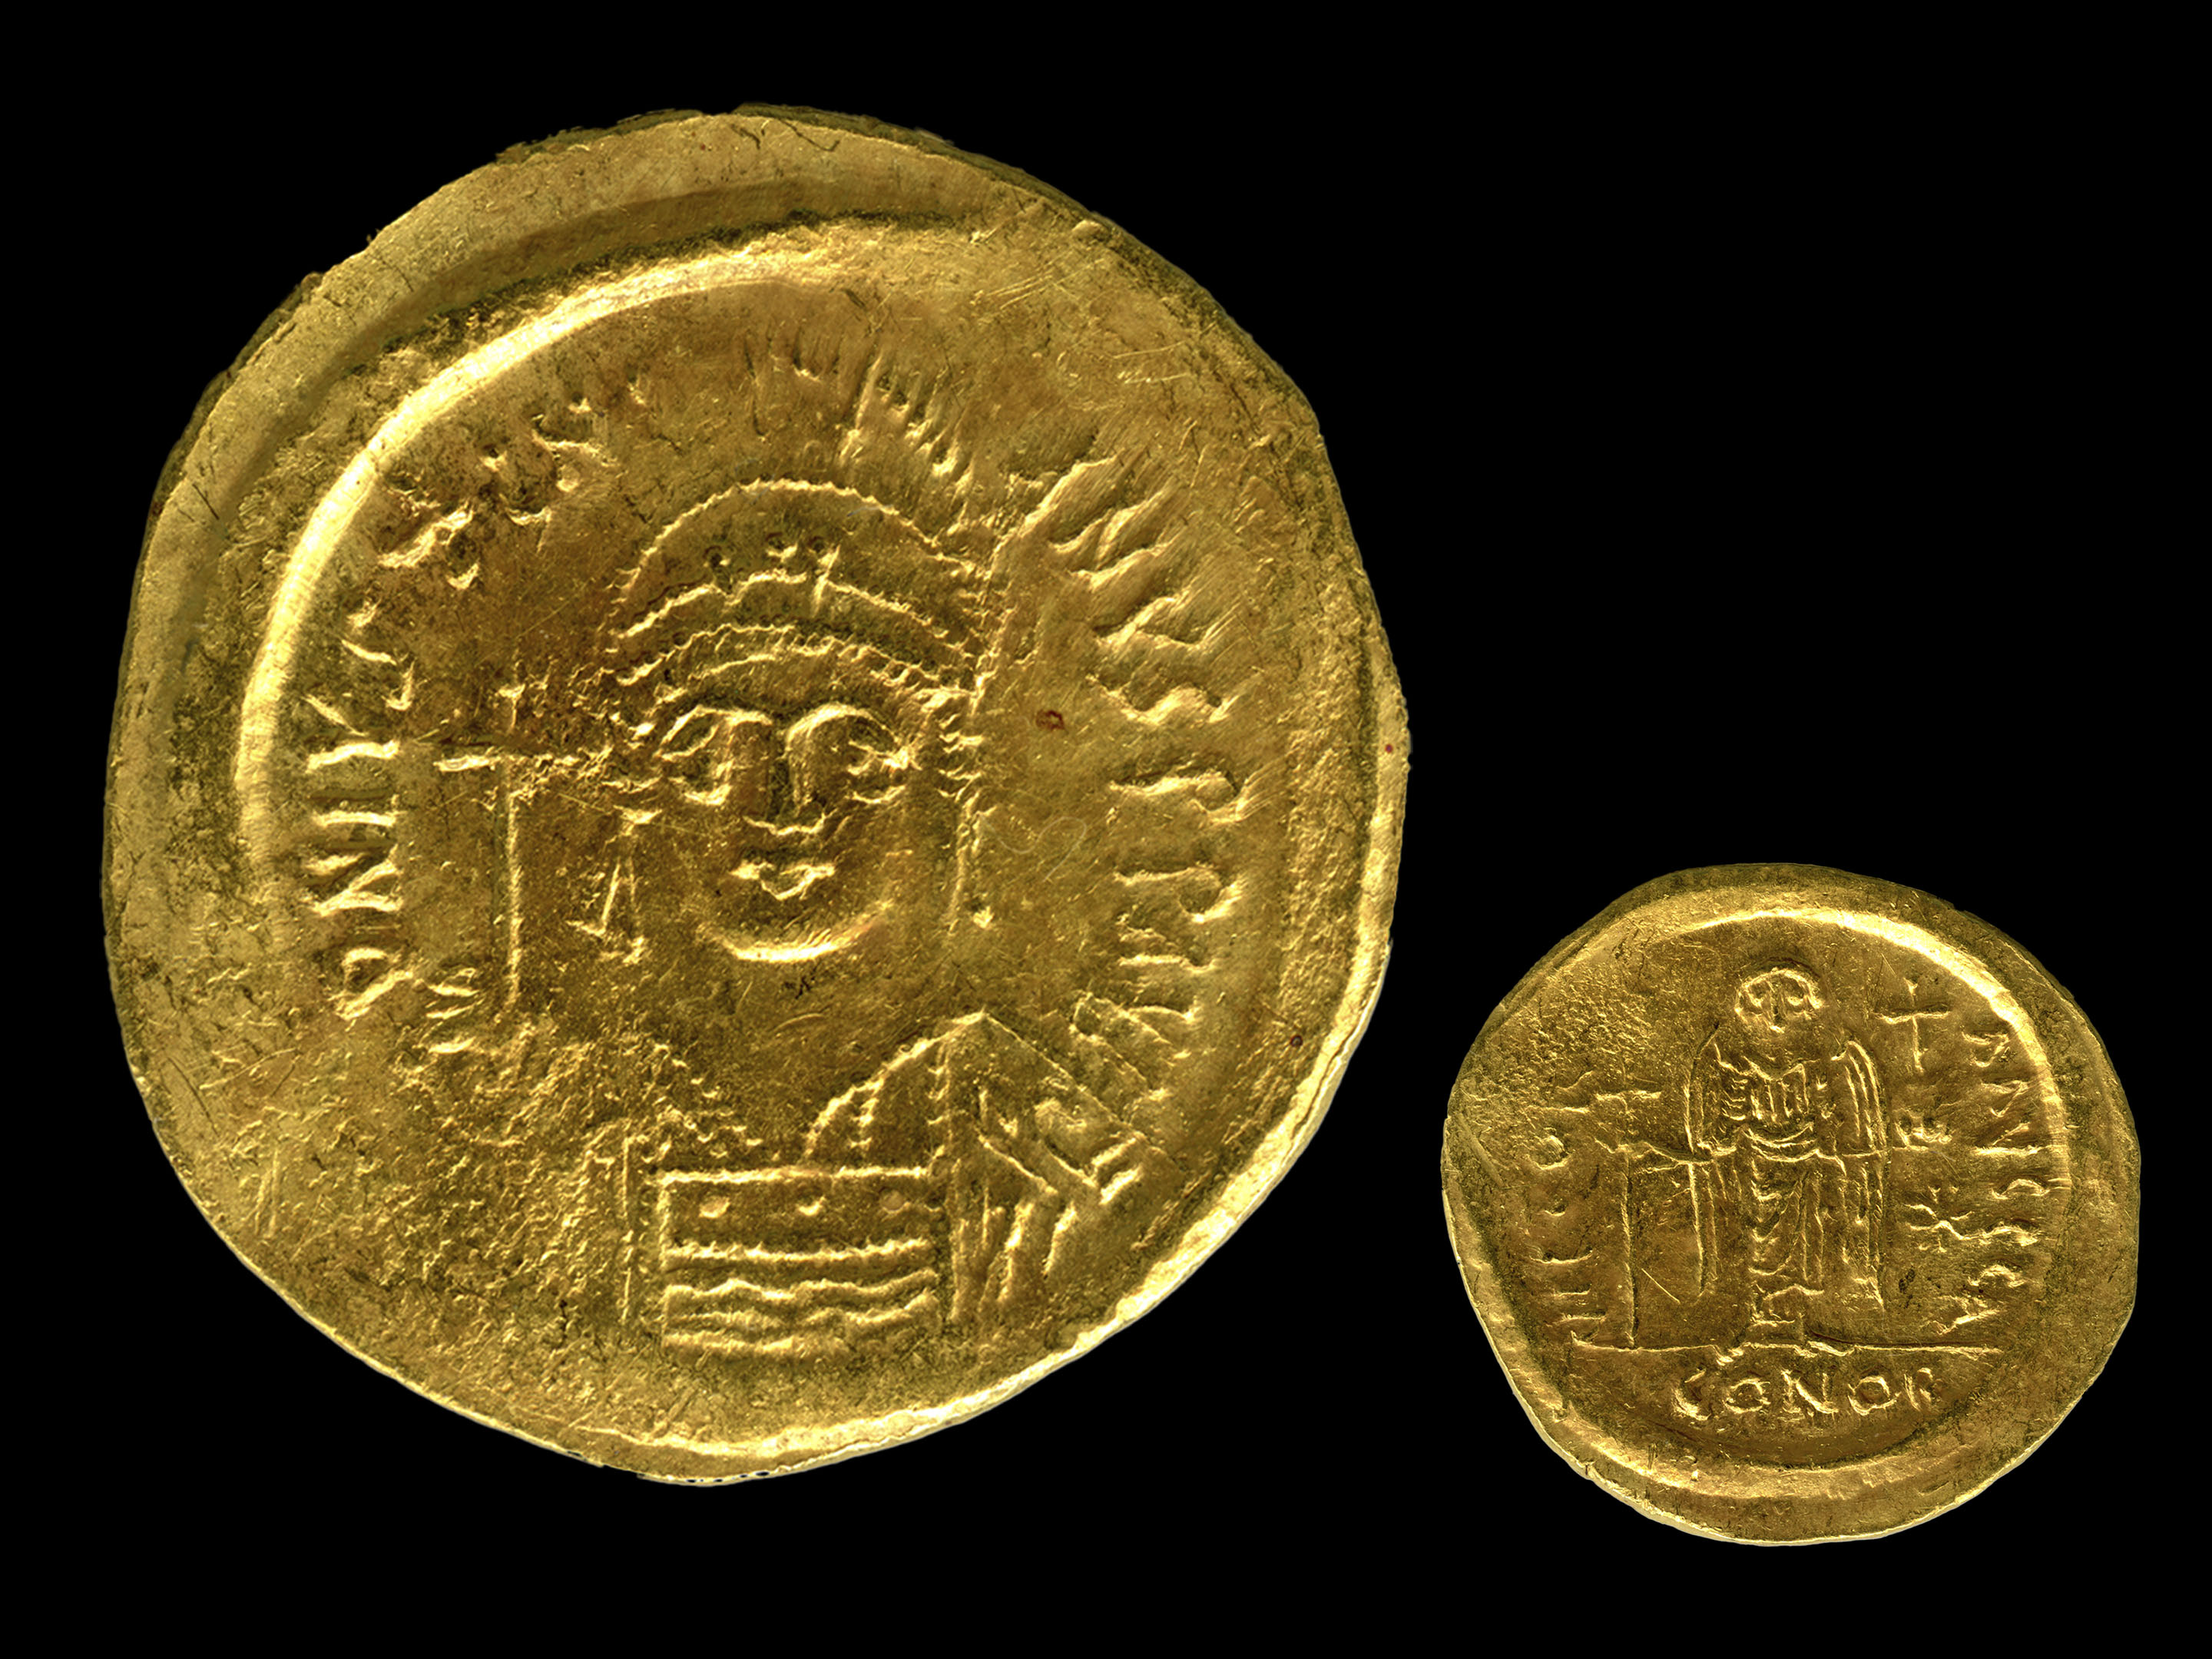 the obverse and reverse of a gold Justinian coin